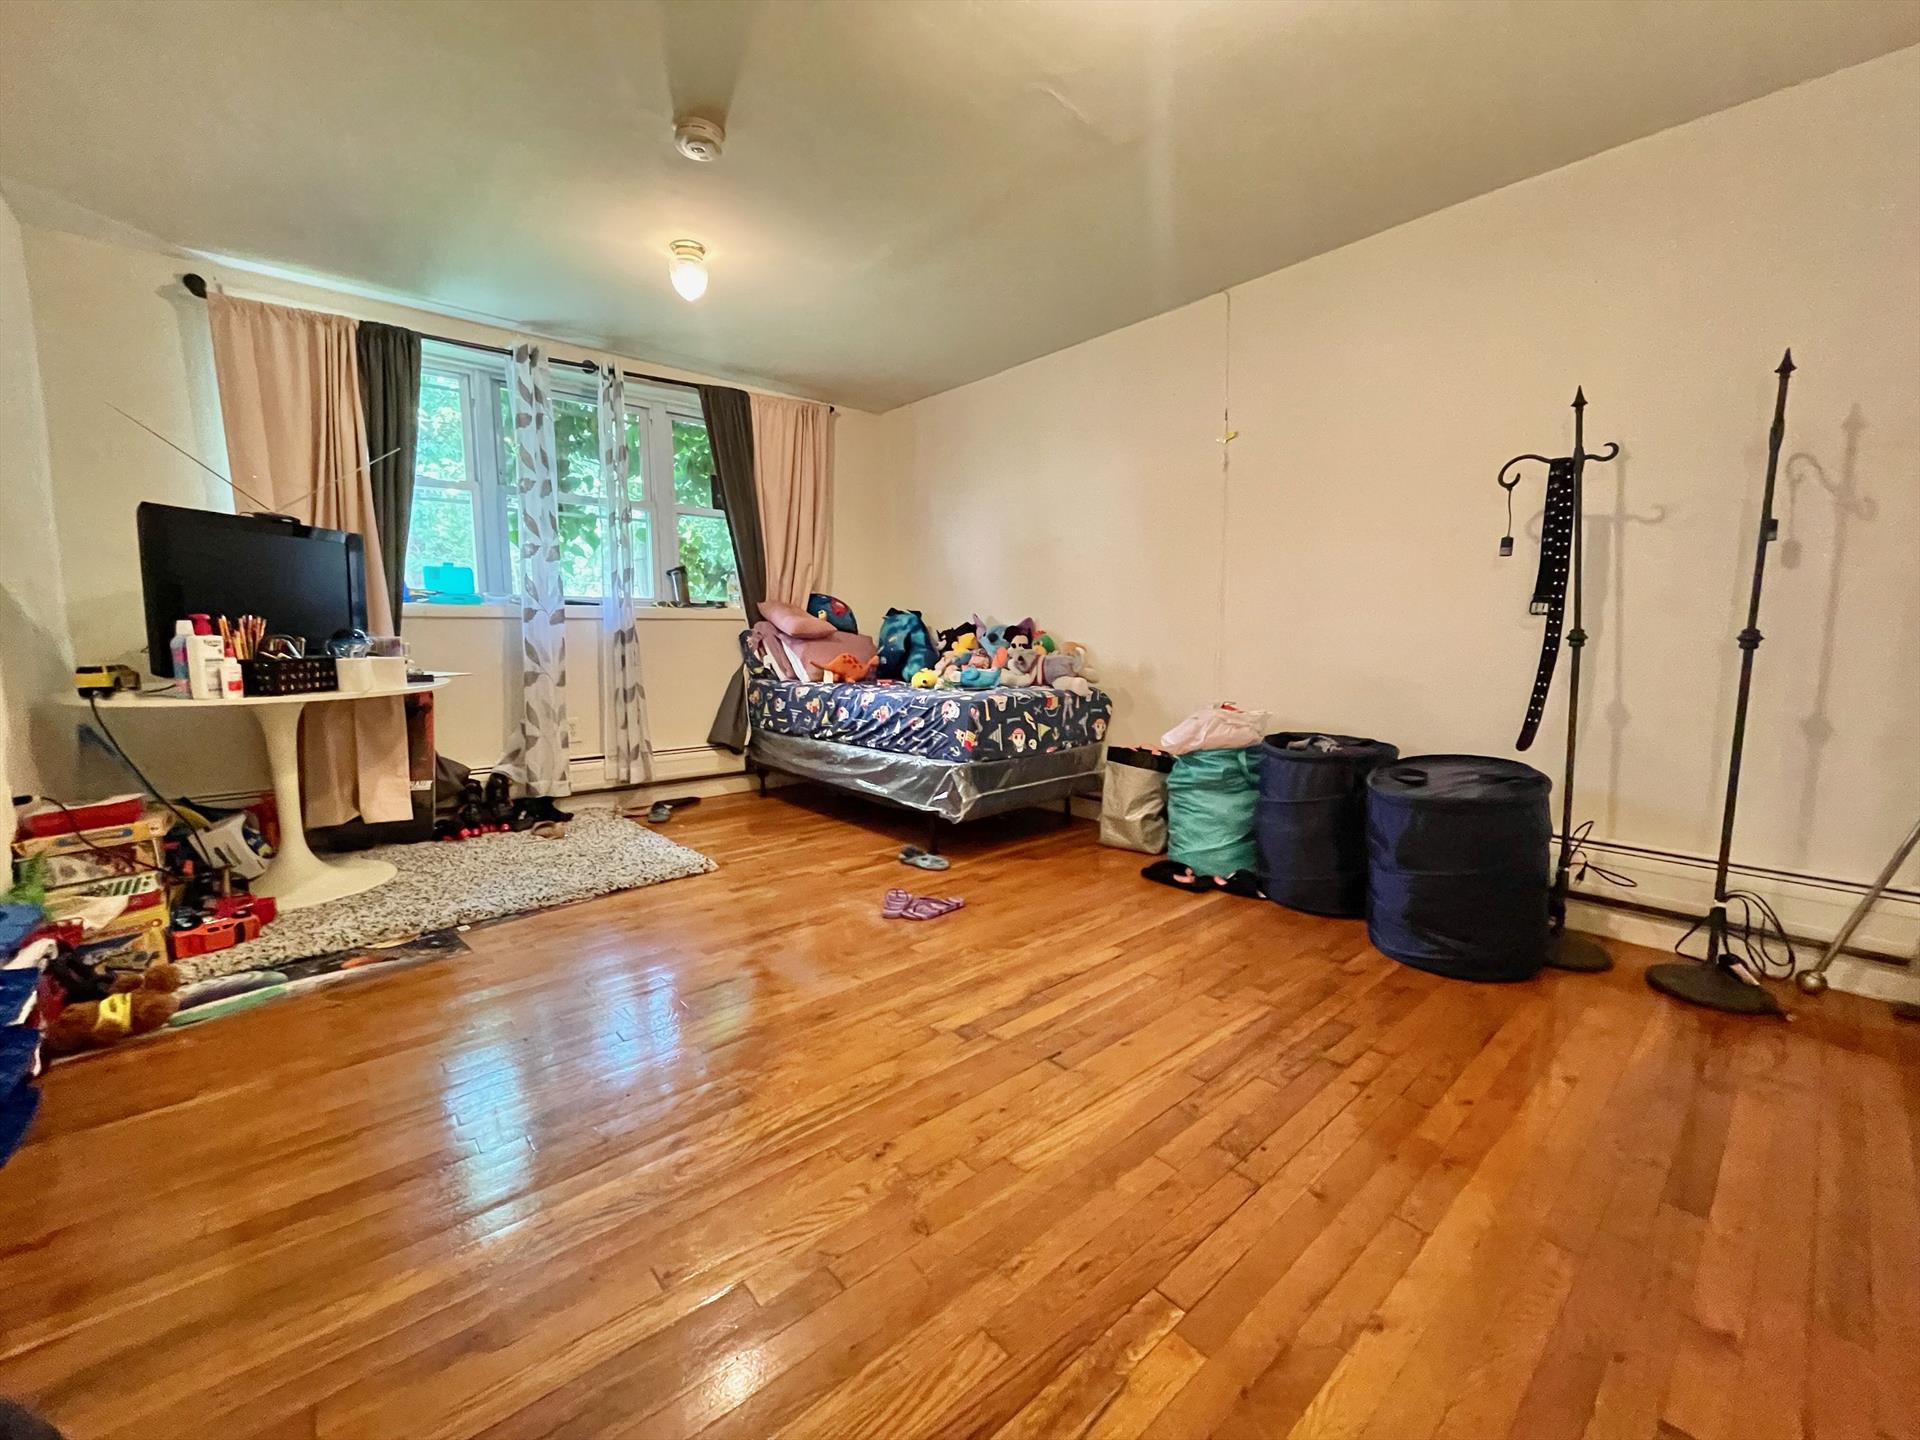 Located in a great Midtown Hoboken location, this apartment allows for easy transportation for commuters who can also enjoy close proximity to great restaurants, shopping, and parks. This space features two oversized bedrooms and kitchen equipped with dishwasher and gas oven. Available ASAP! Ask to see the virtual tour! 